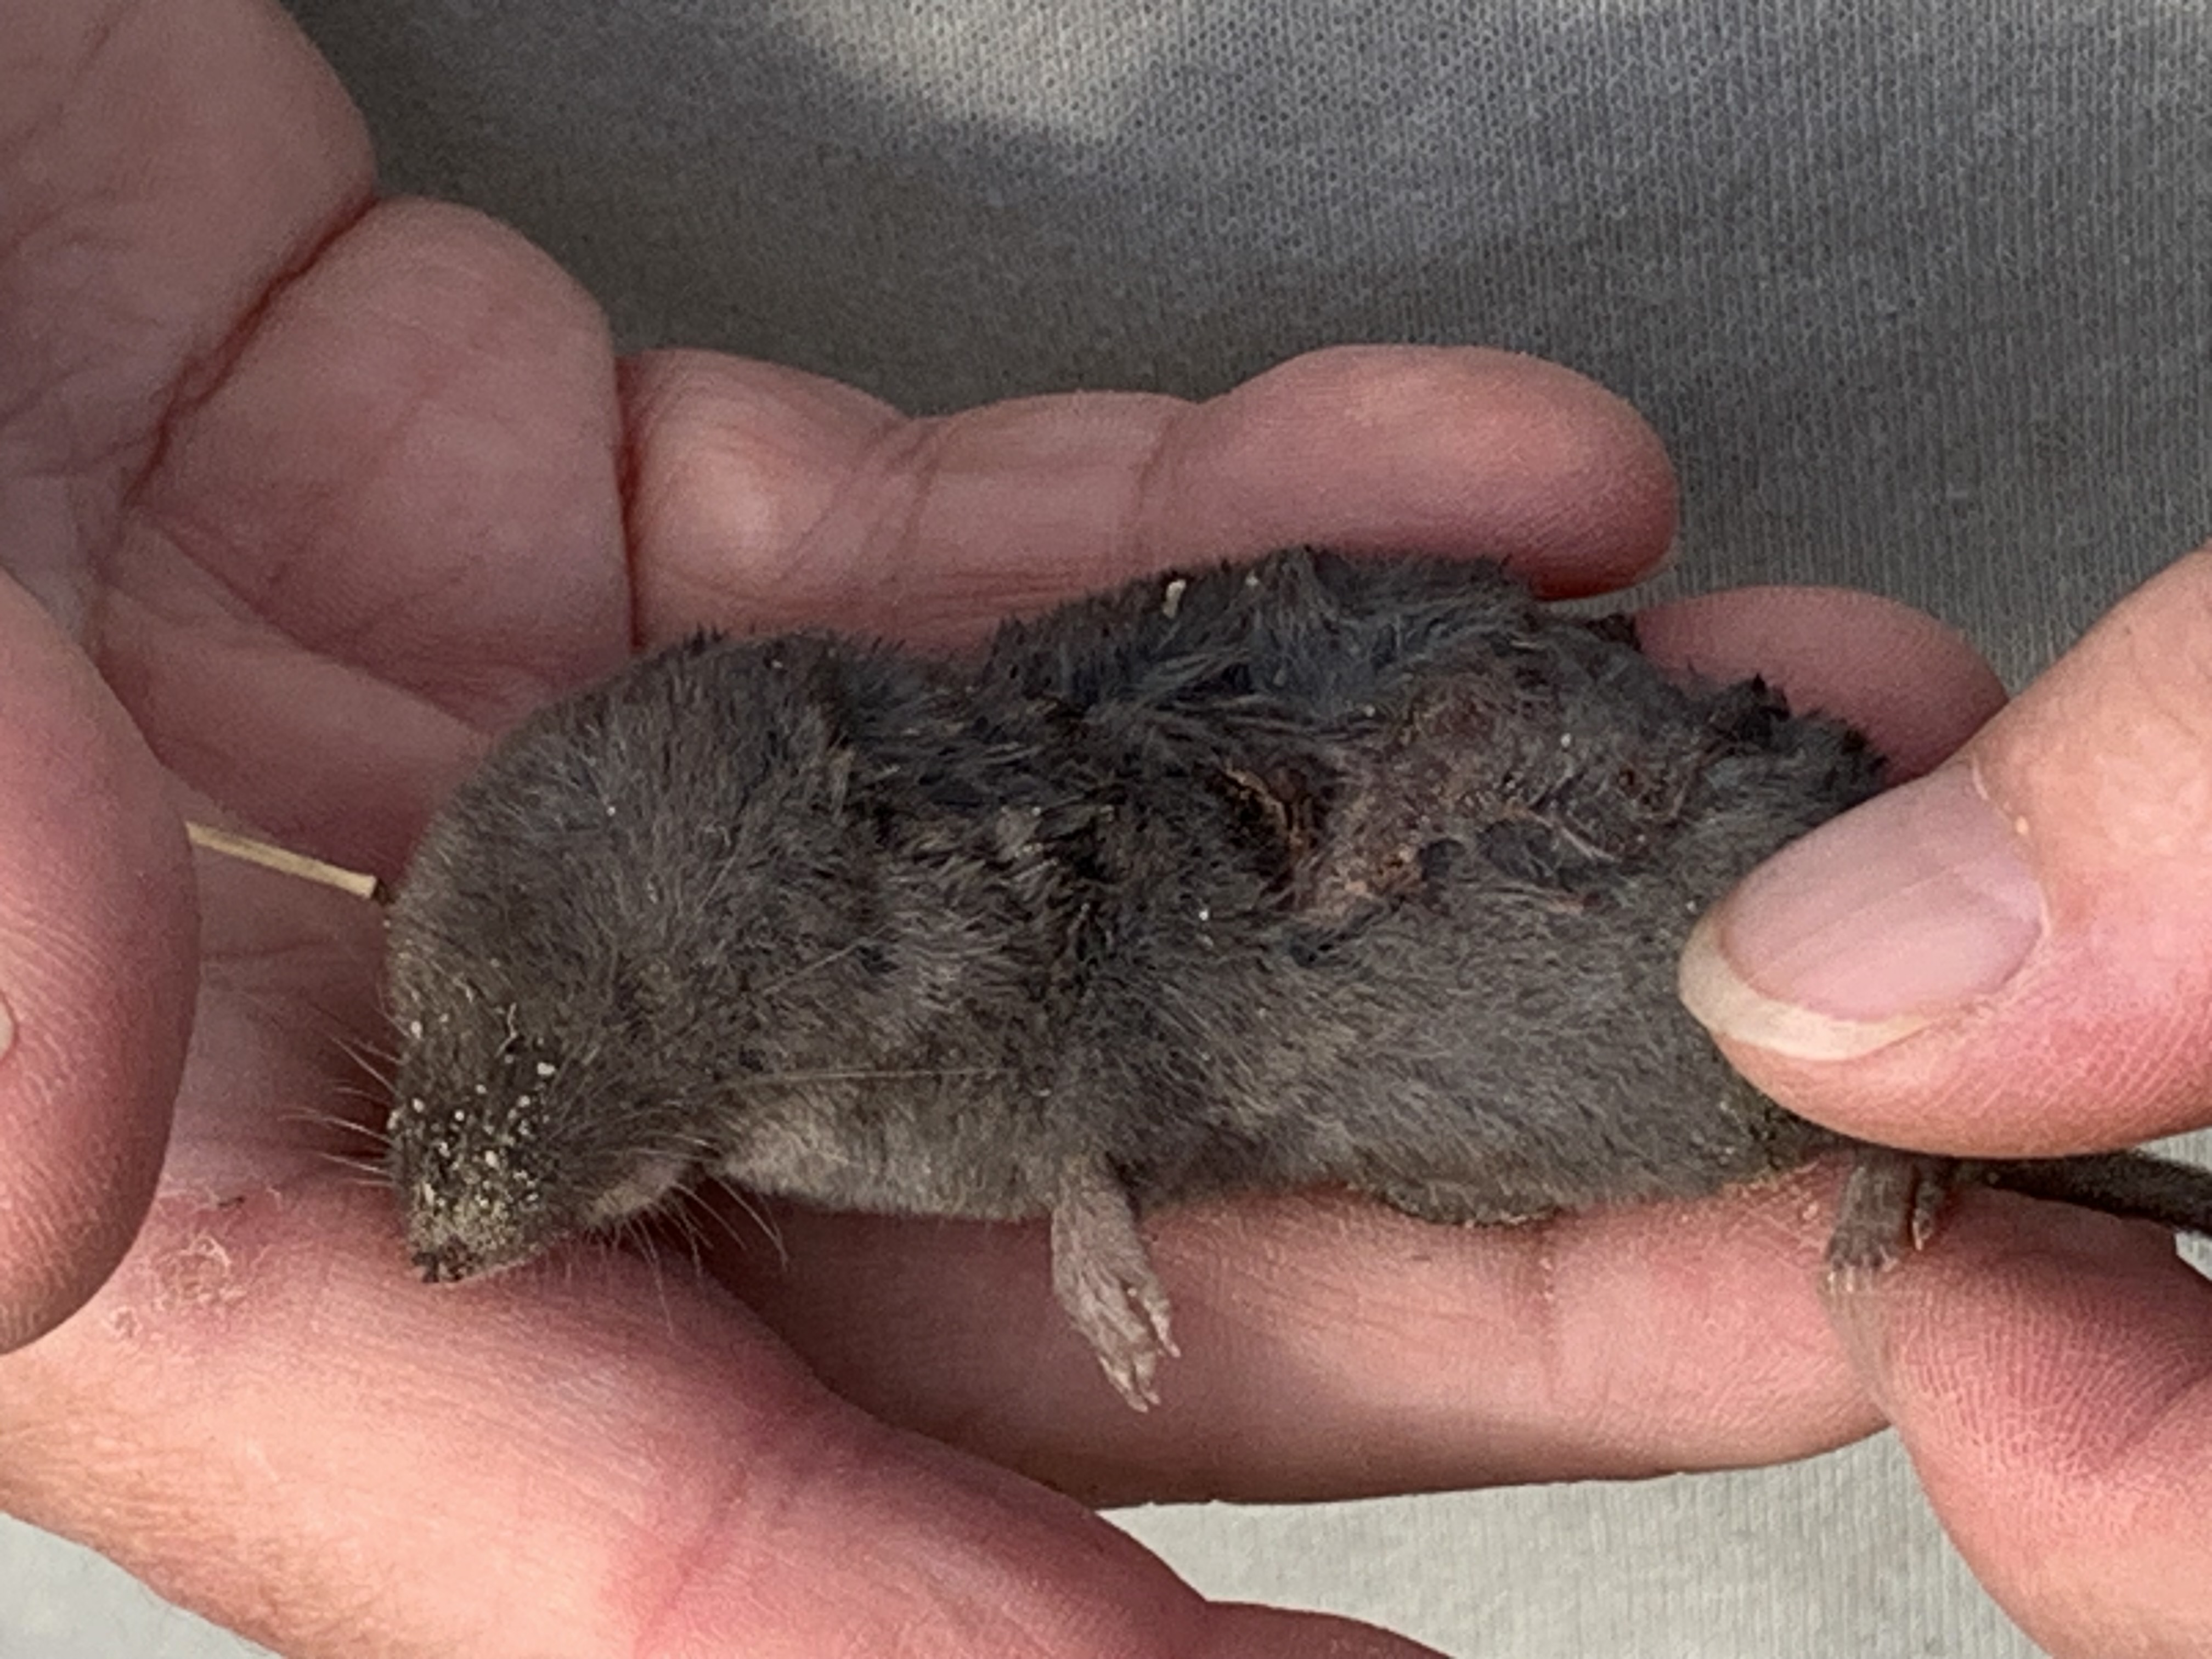 A grey, mouse-size critter with pointy snout, brush-like whiskers and a short tail, rests in Karen's hands. It's dead, possibly mauled or road killed. It's tiny eyes are not visible, buried in the soft fur covering its head. Northern short-tailed shrew.